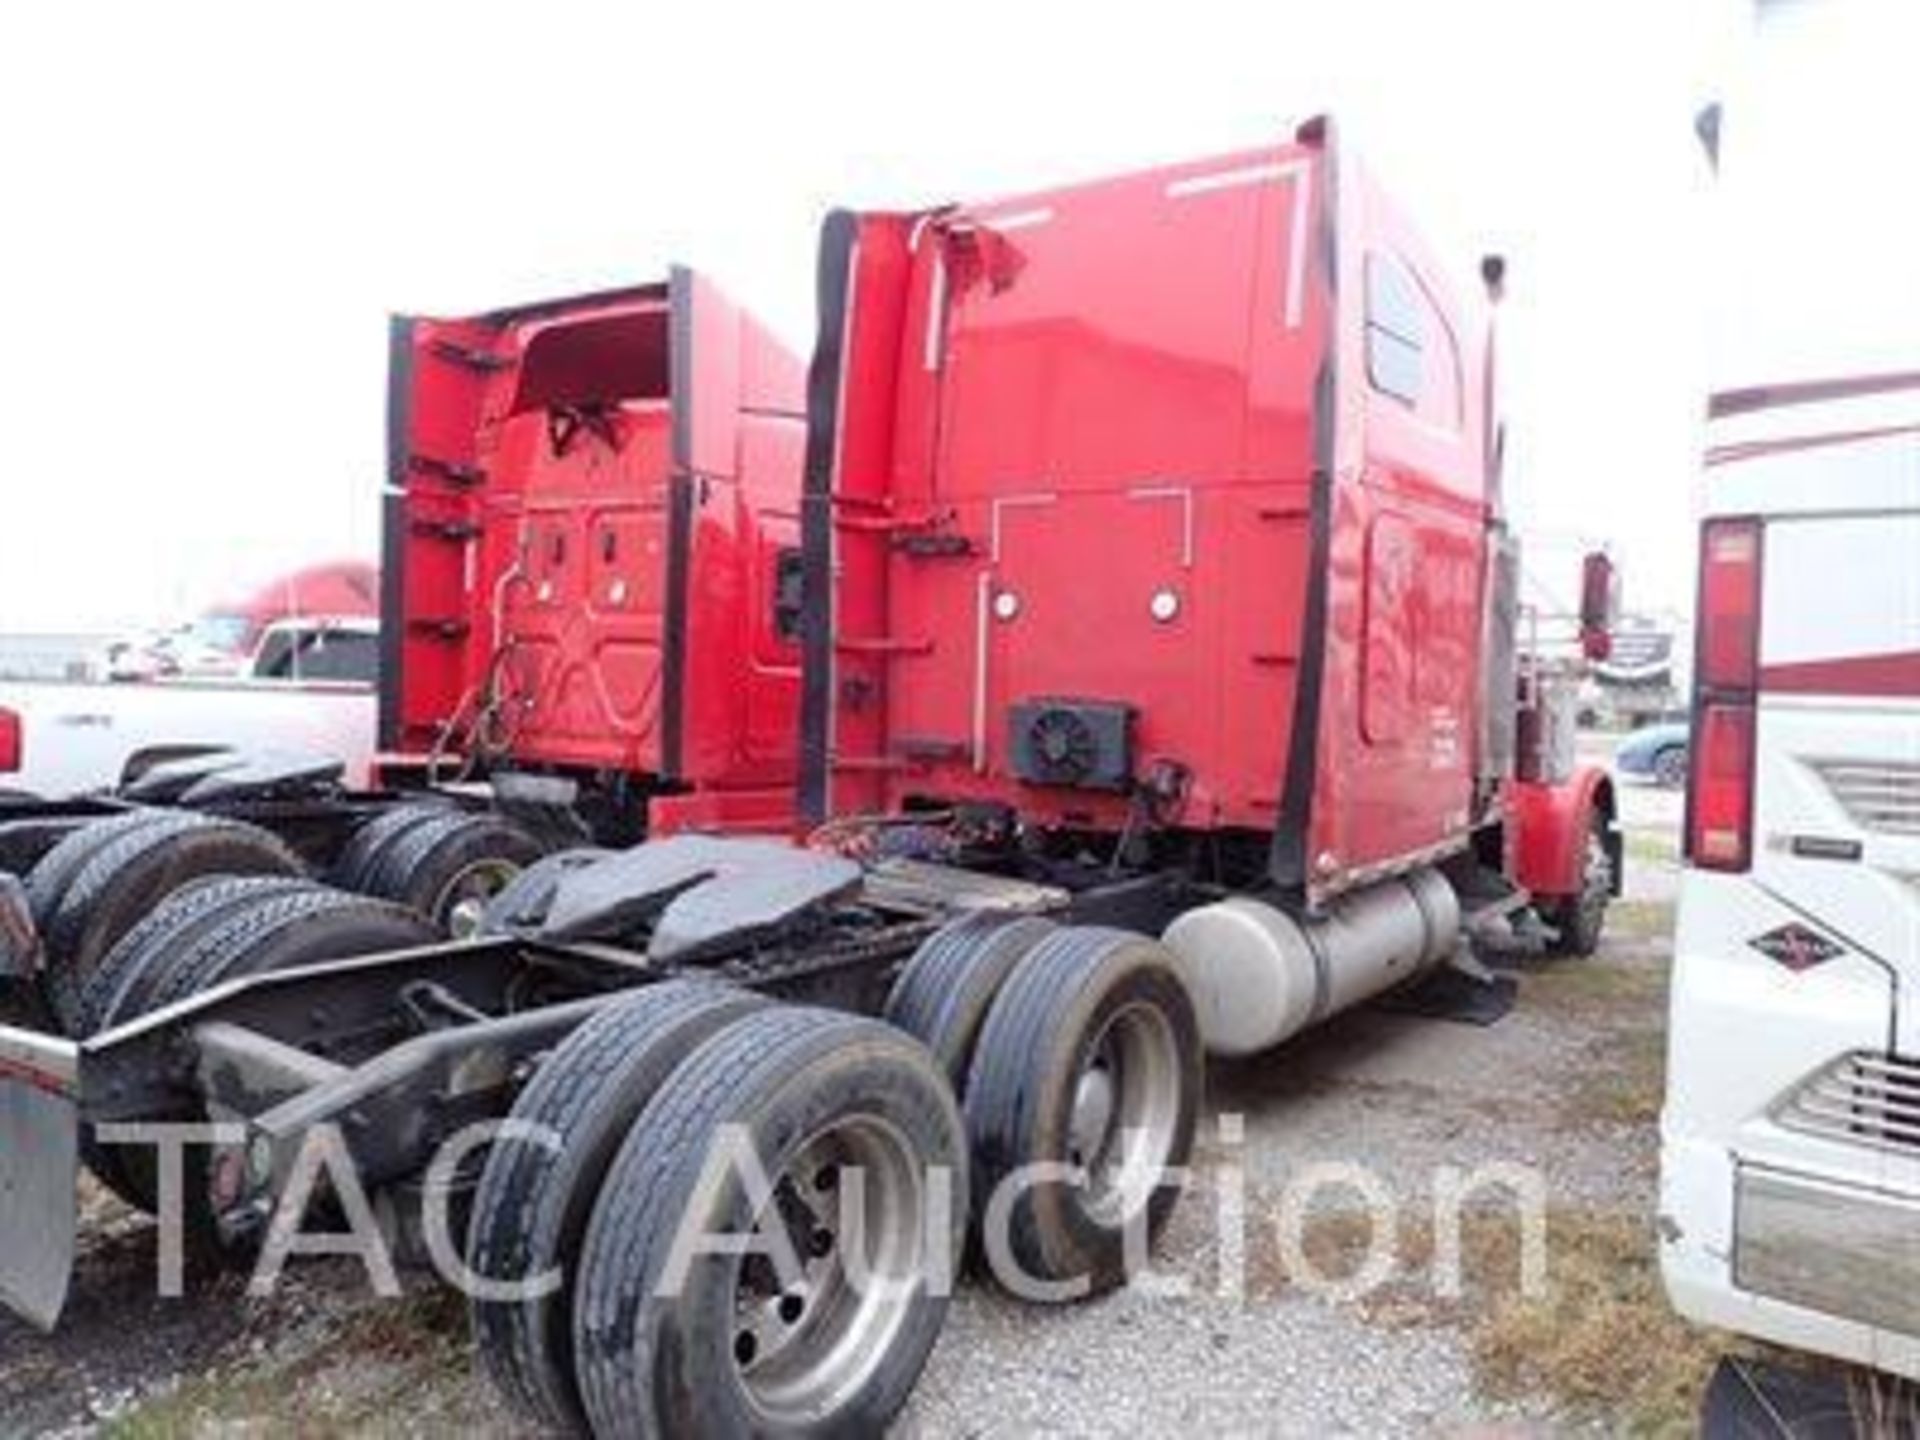 2007 Freightliner FLD132 Classic Sleeper Truck - Image 3 of 91